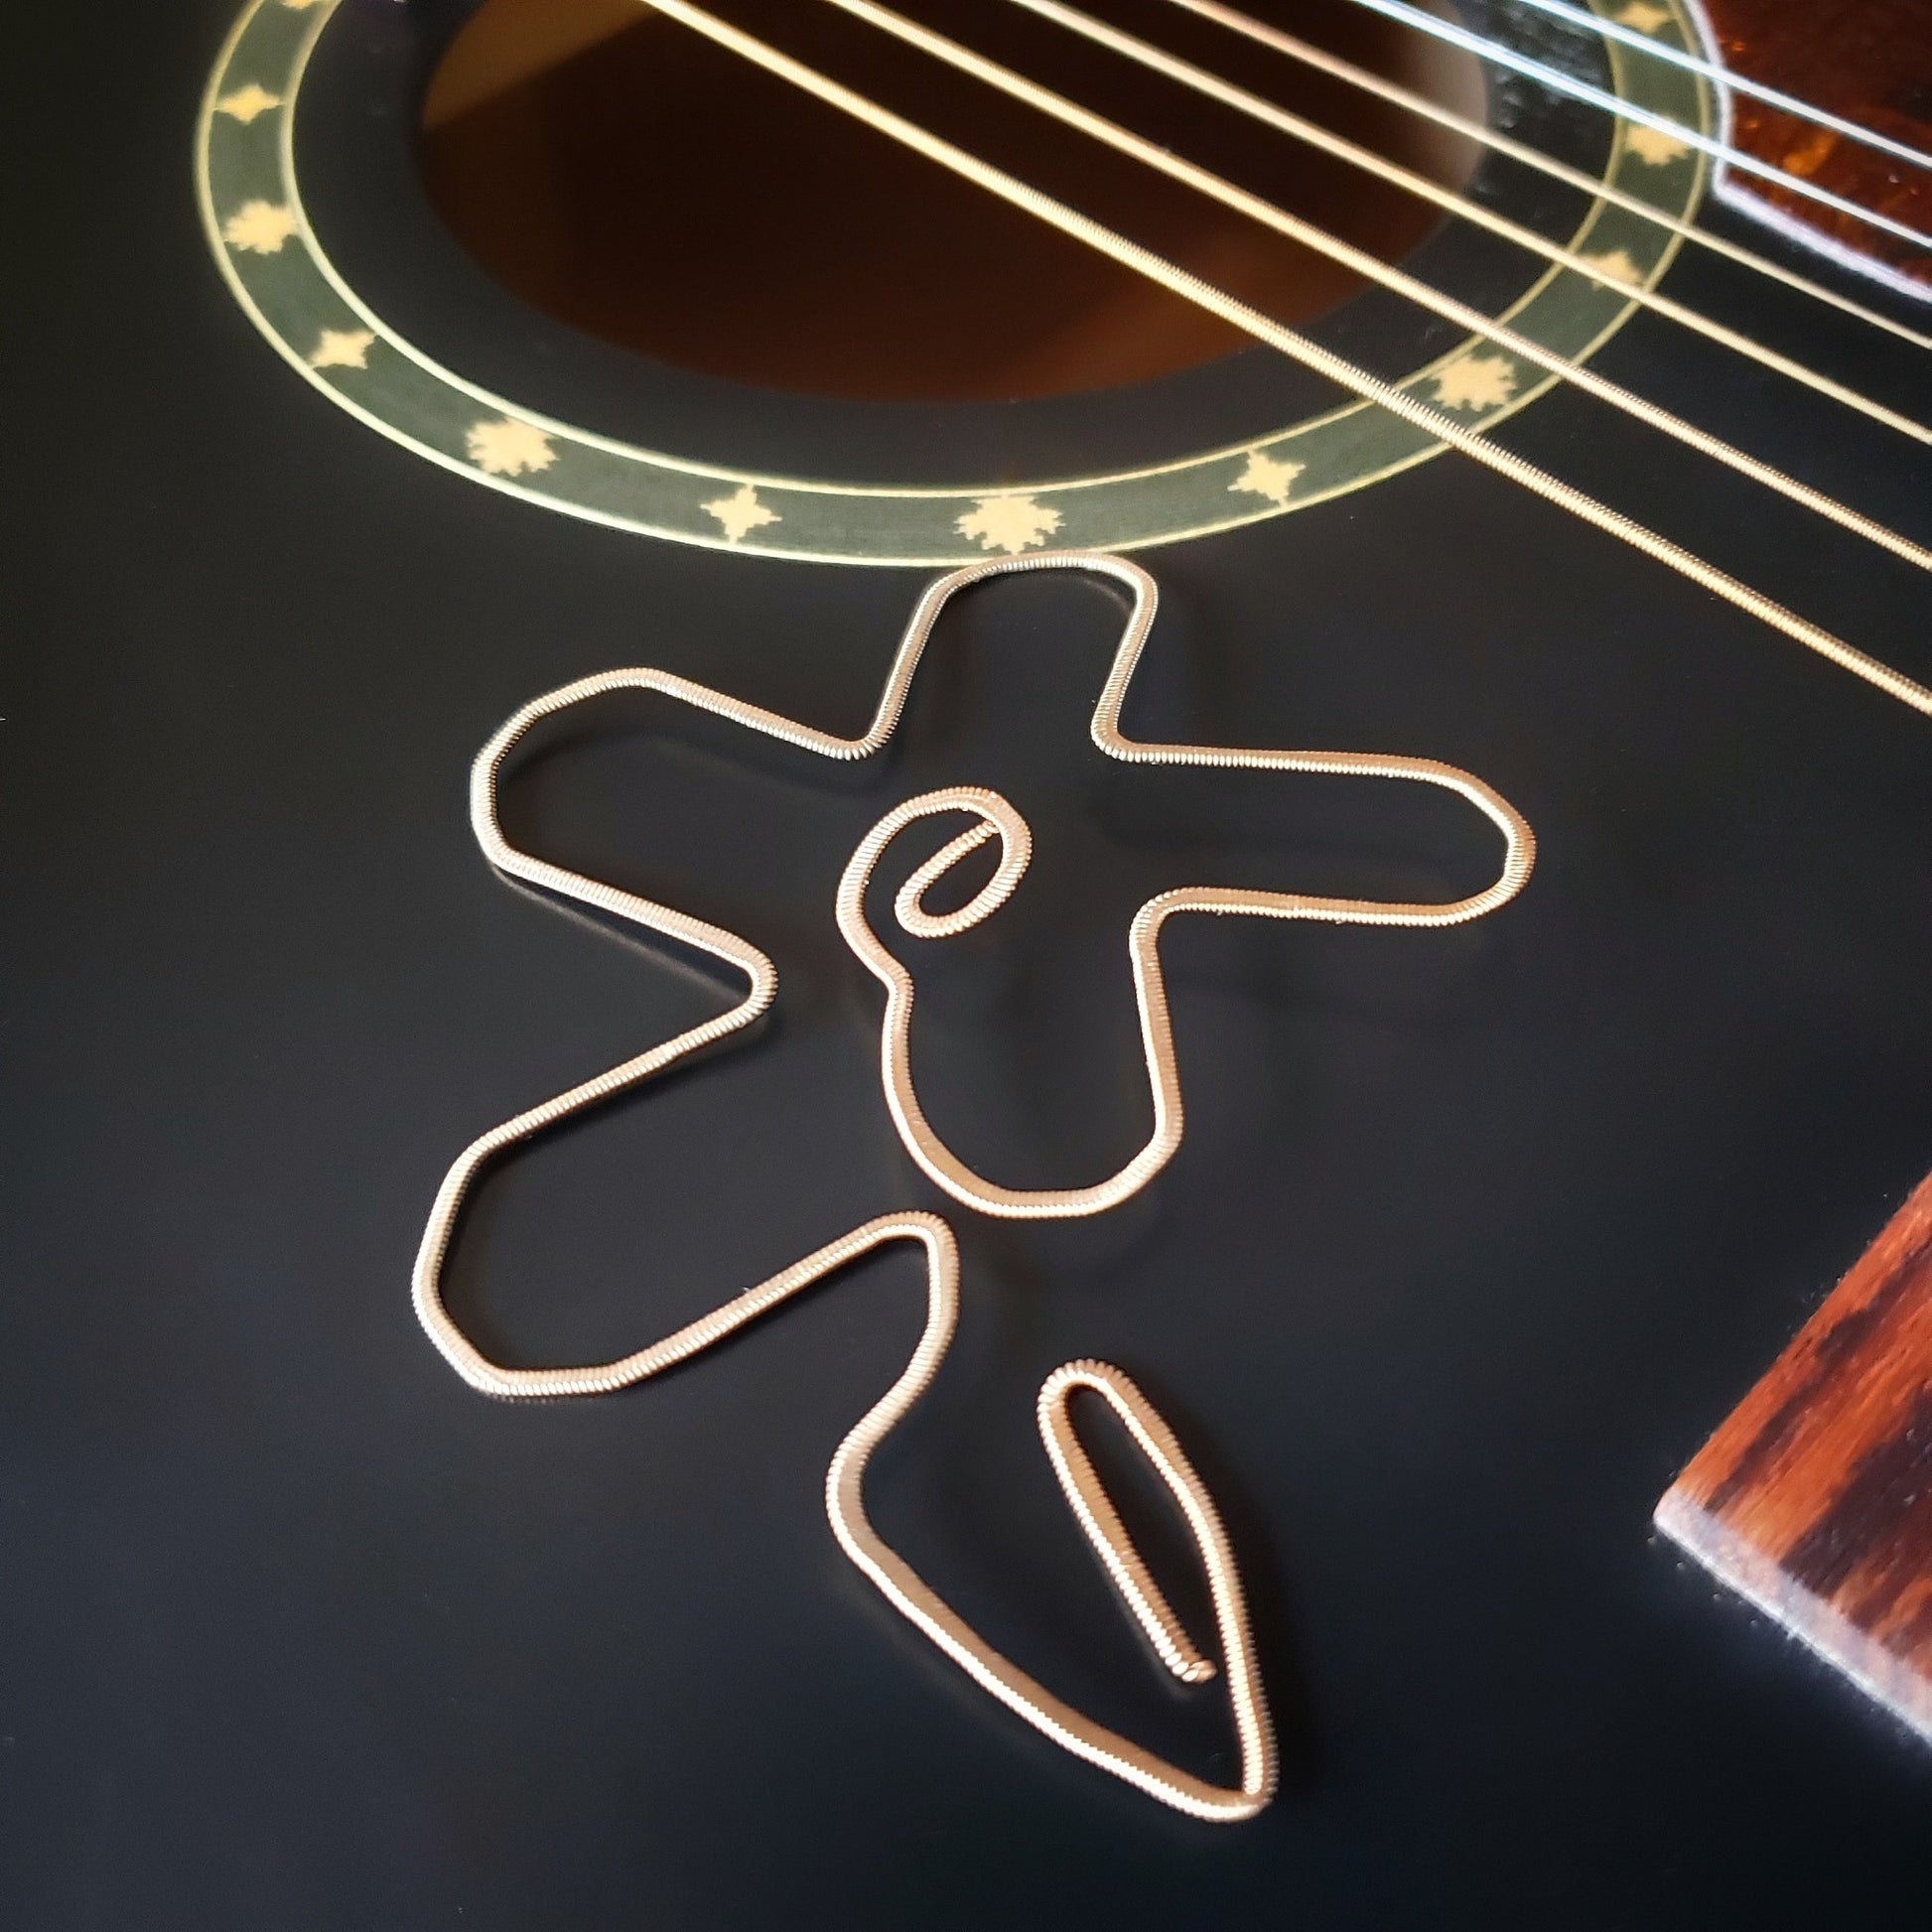 bookmark shaped like a flower made from a hammered guitar string lying the sound hole of  a black guitar